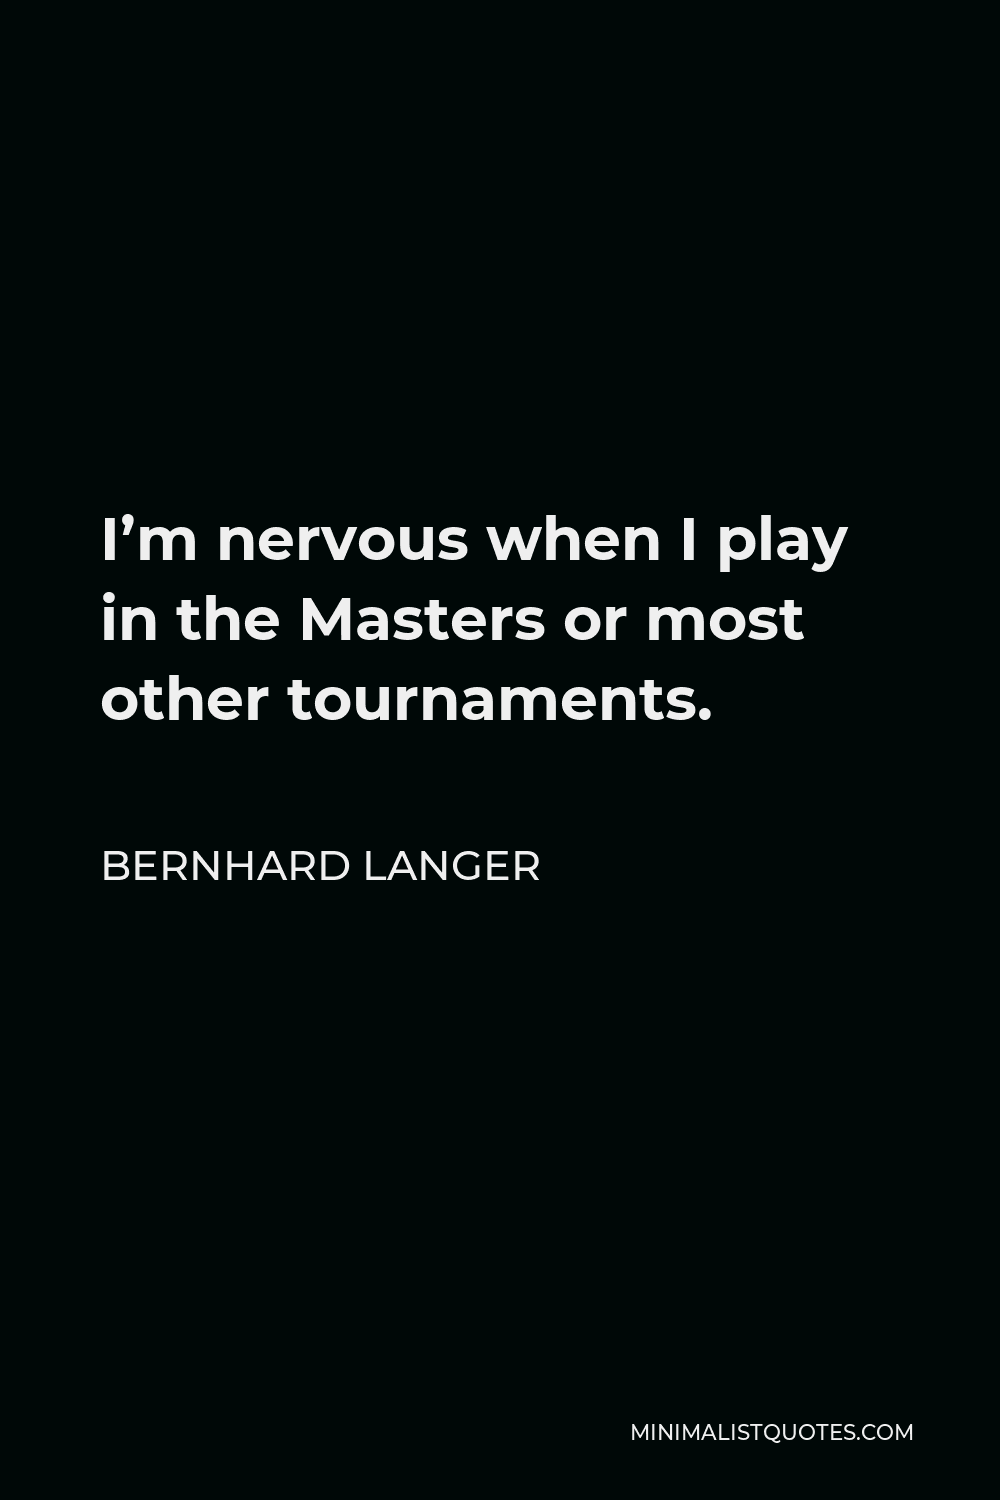 Bernhard Langer Quote - I’m nervous when I play in the Masters or most other tournaments.